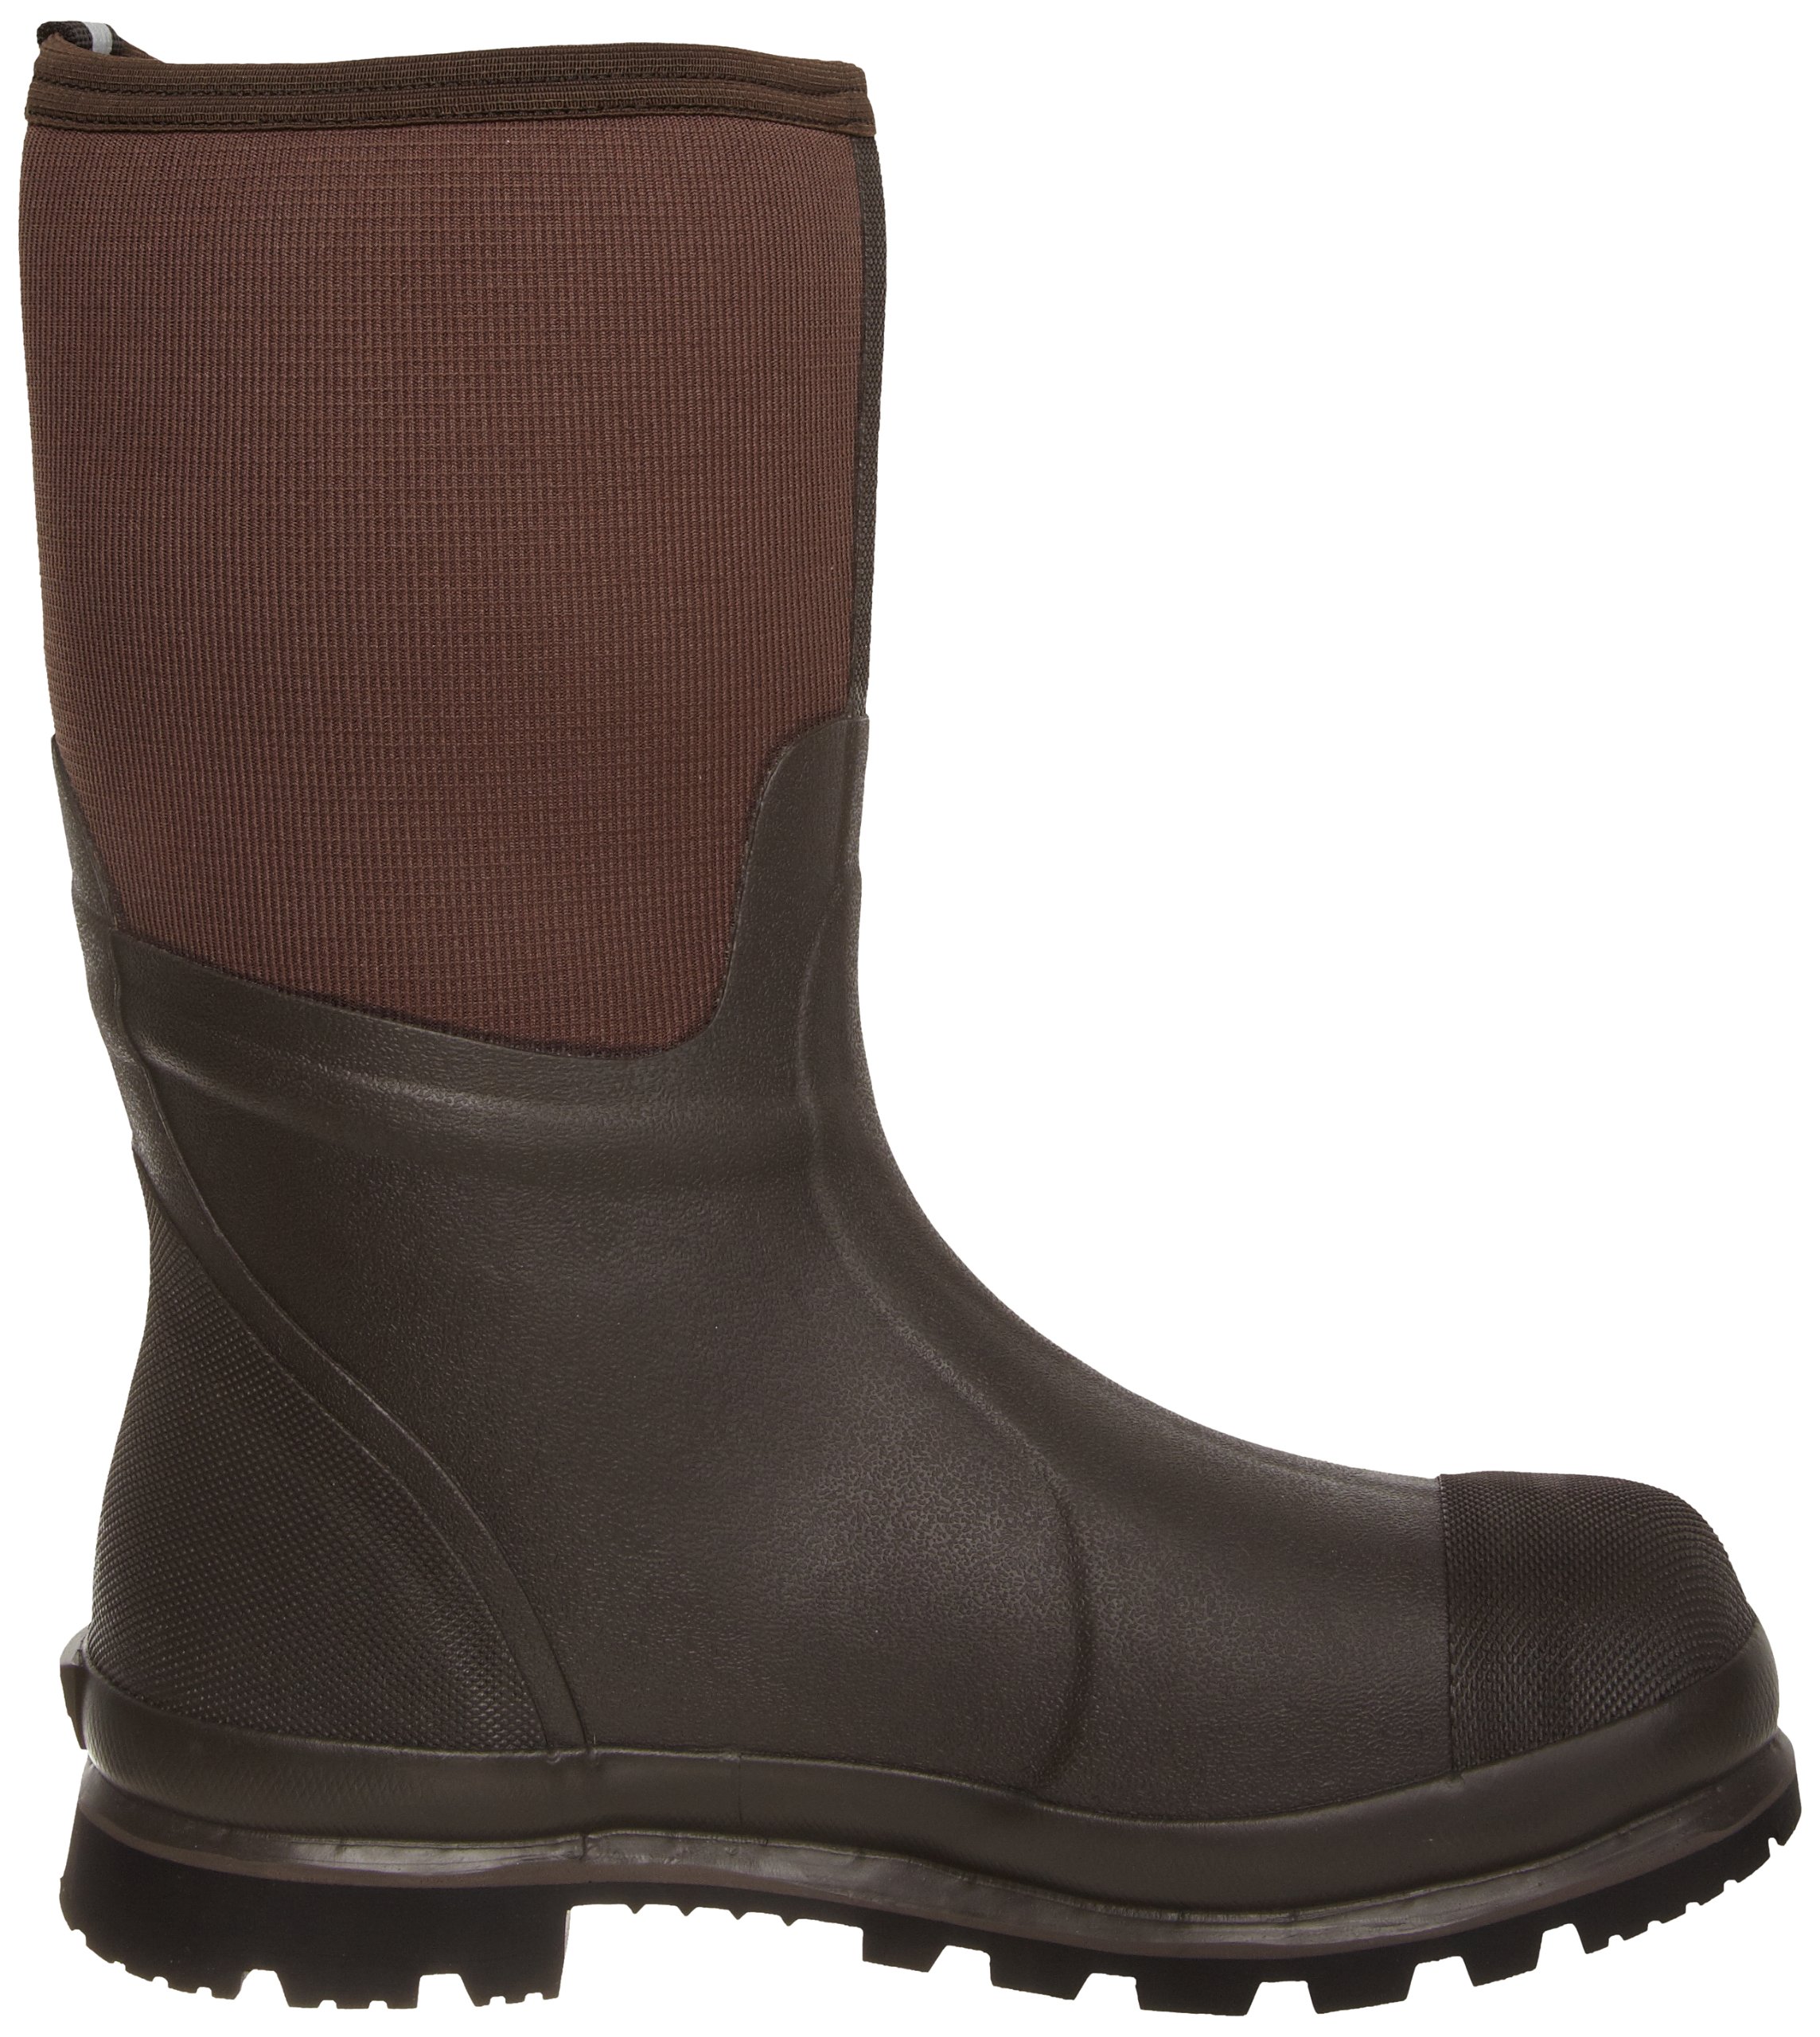 Muck Boot womens Chore Cool Mid-u industrial and construction boots, Brown, 8 Women 7 Men US